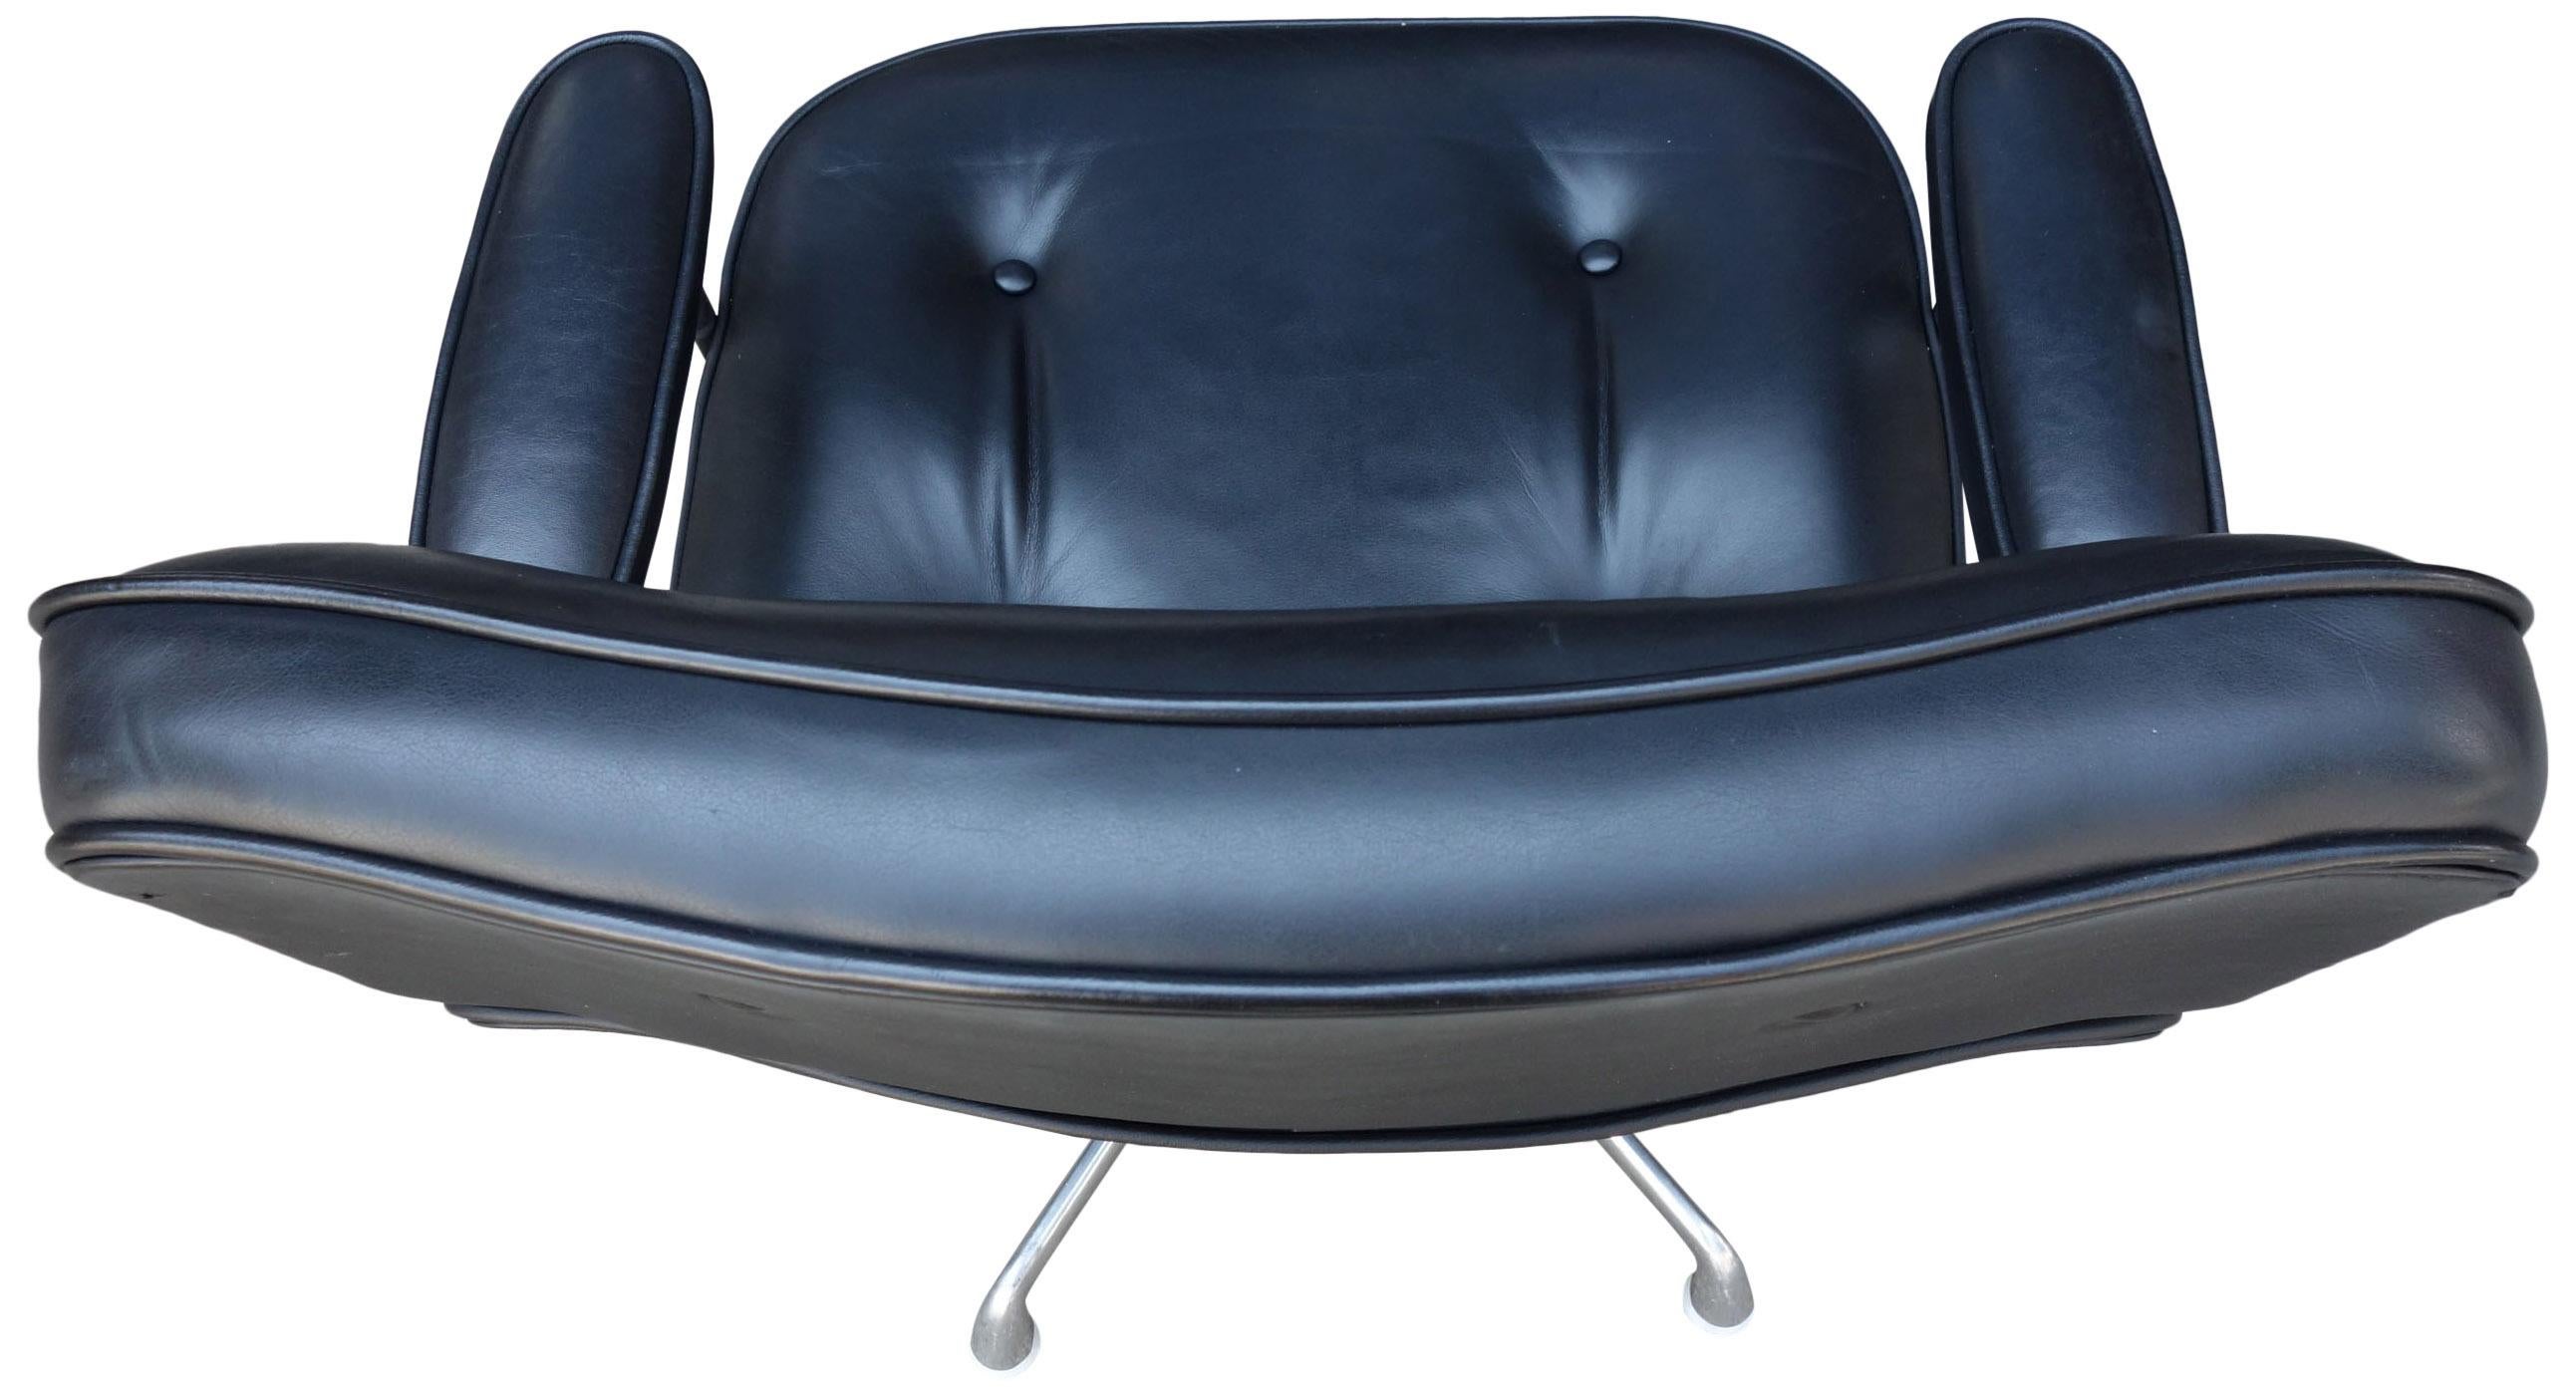 Aluminum Midcentury Eames Lounge Chair for Herman Miller Time-Life